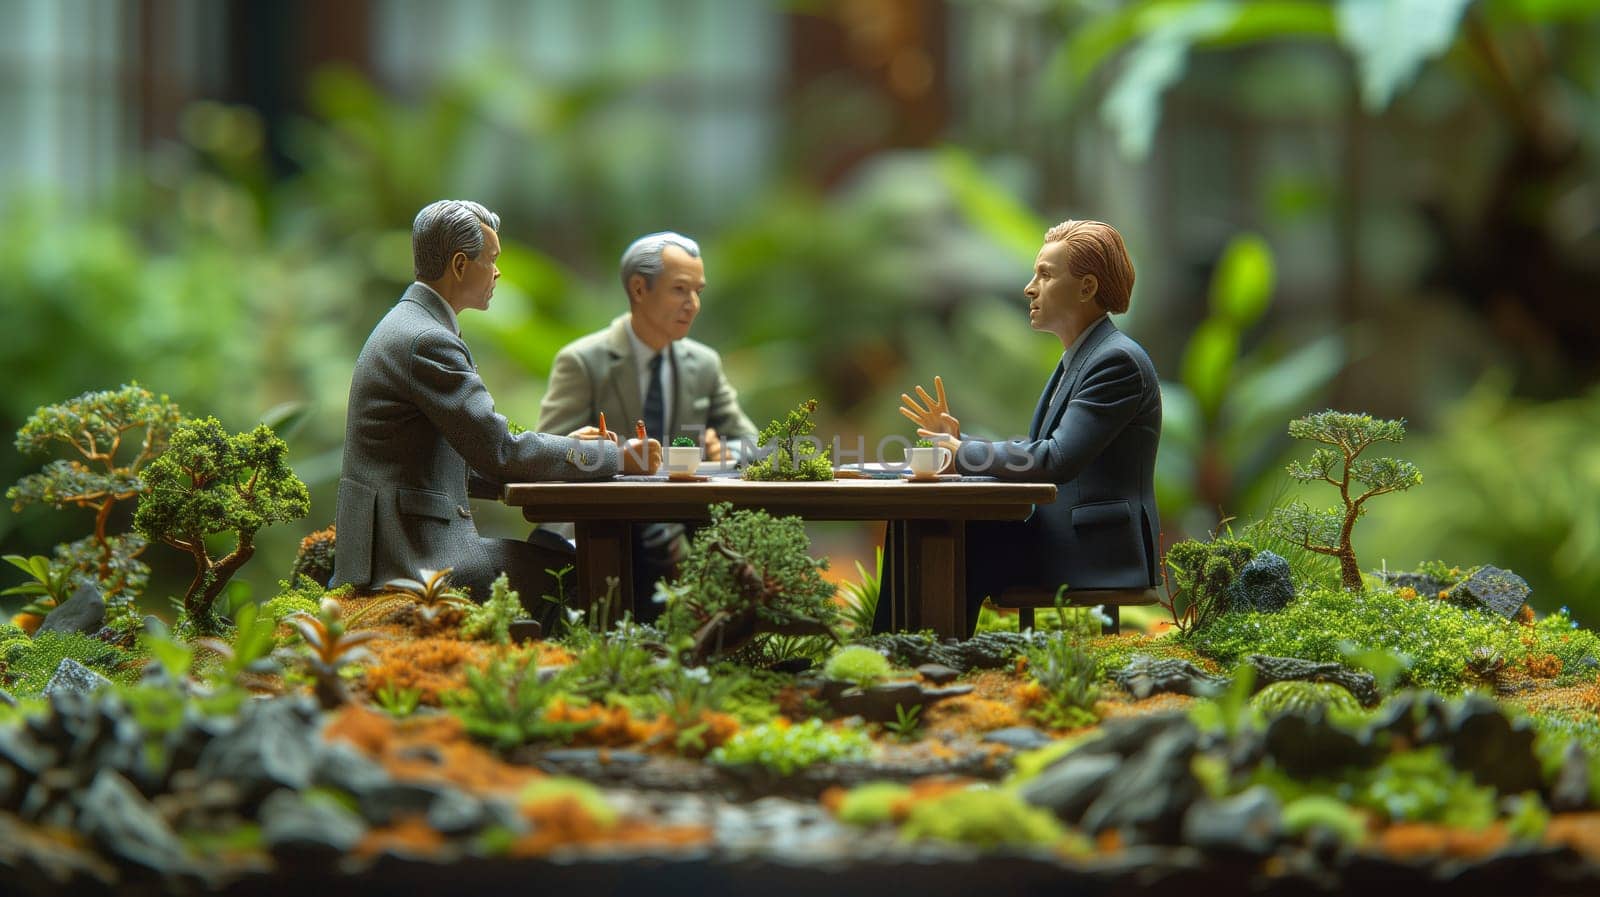 Architectural model of group of people are sitting at a table in the woods by richwolf